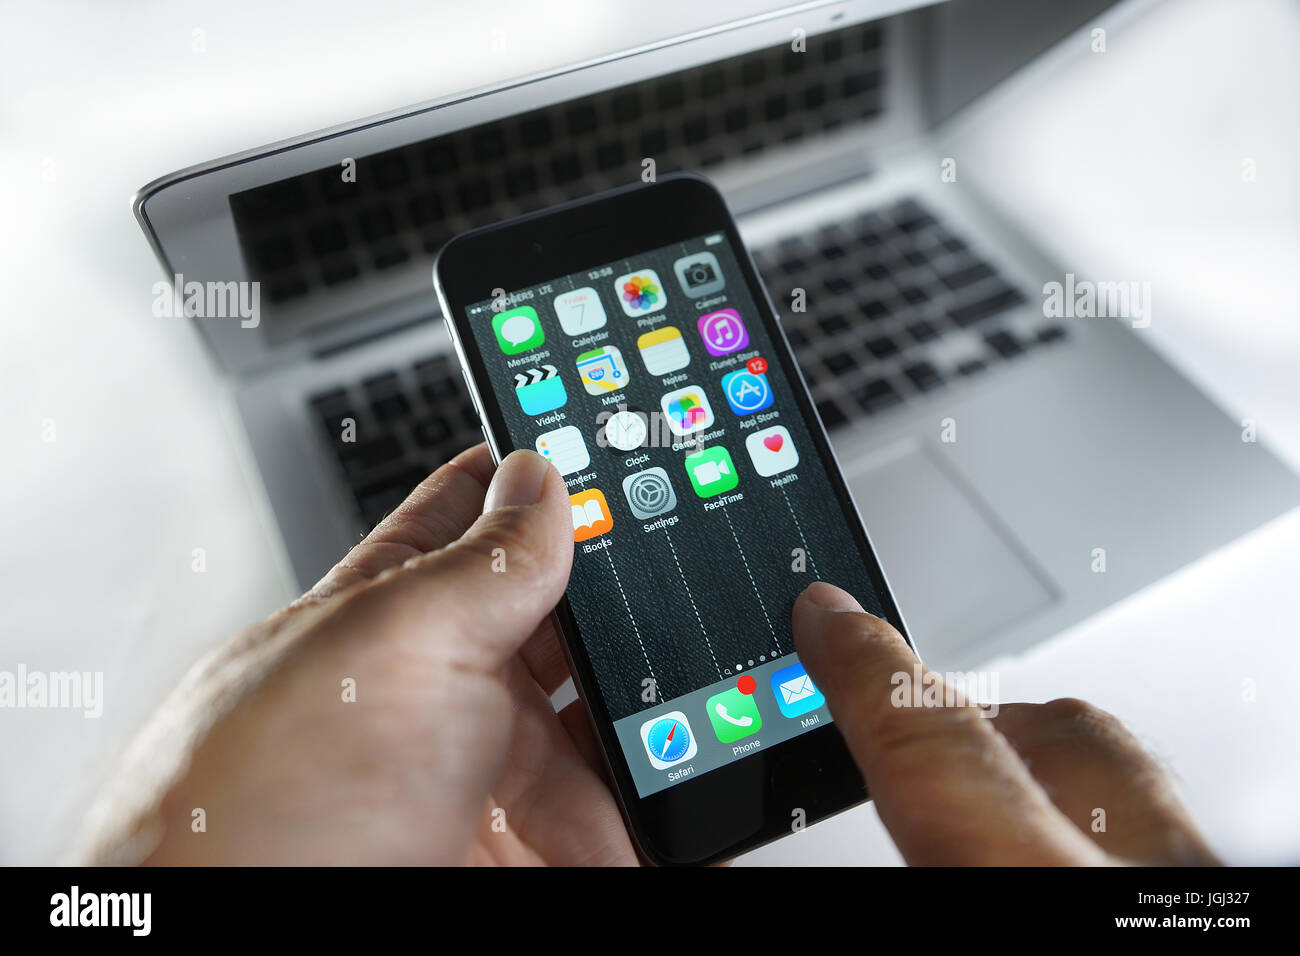 Montreal, Canada, 7 July, 2017. Hands holding an iphone 6 on top of a Macbook Air.Credit:Mario Beauregard/Alamy Live News Stock Photo